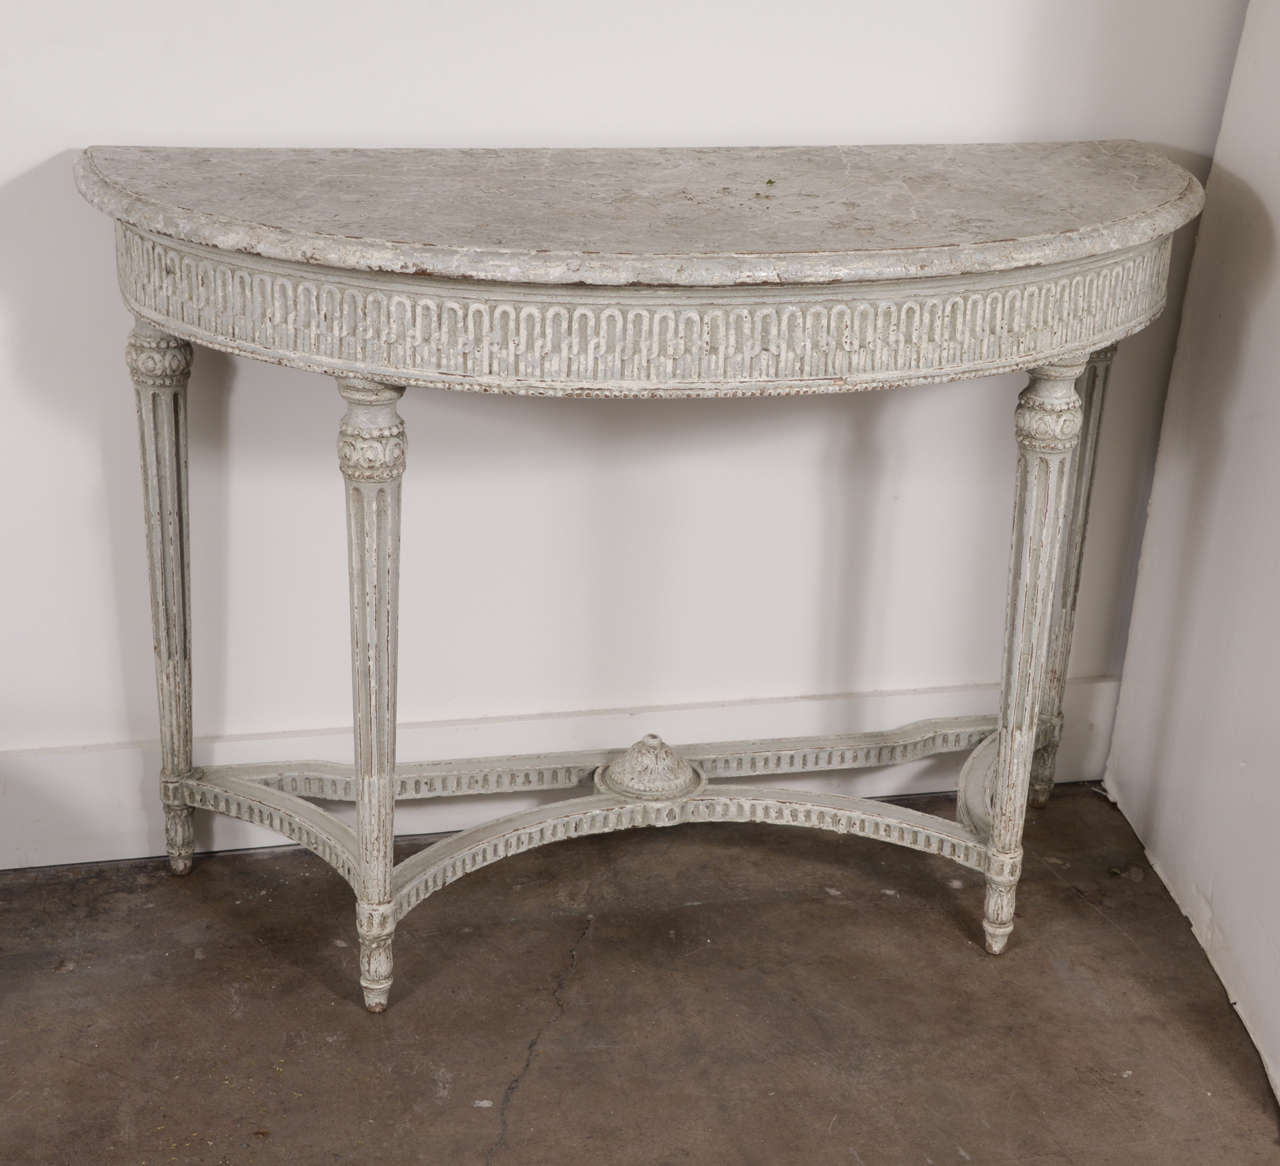 Pair of 19th century painted demilune consoles with beautiful carving throughout. Top has a subtle faux marble finishing. Paint is more recent.